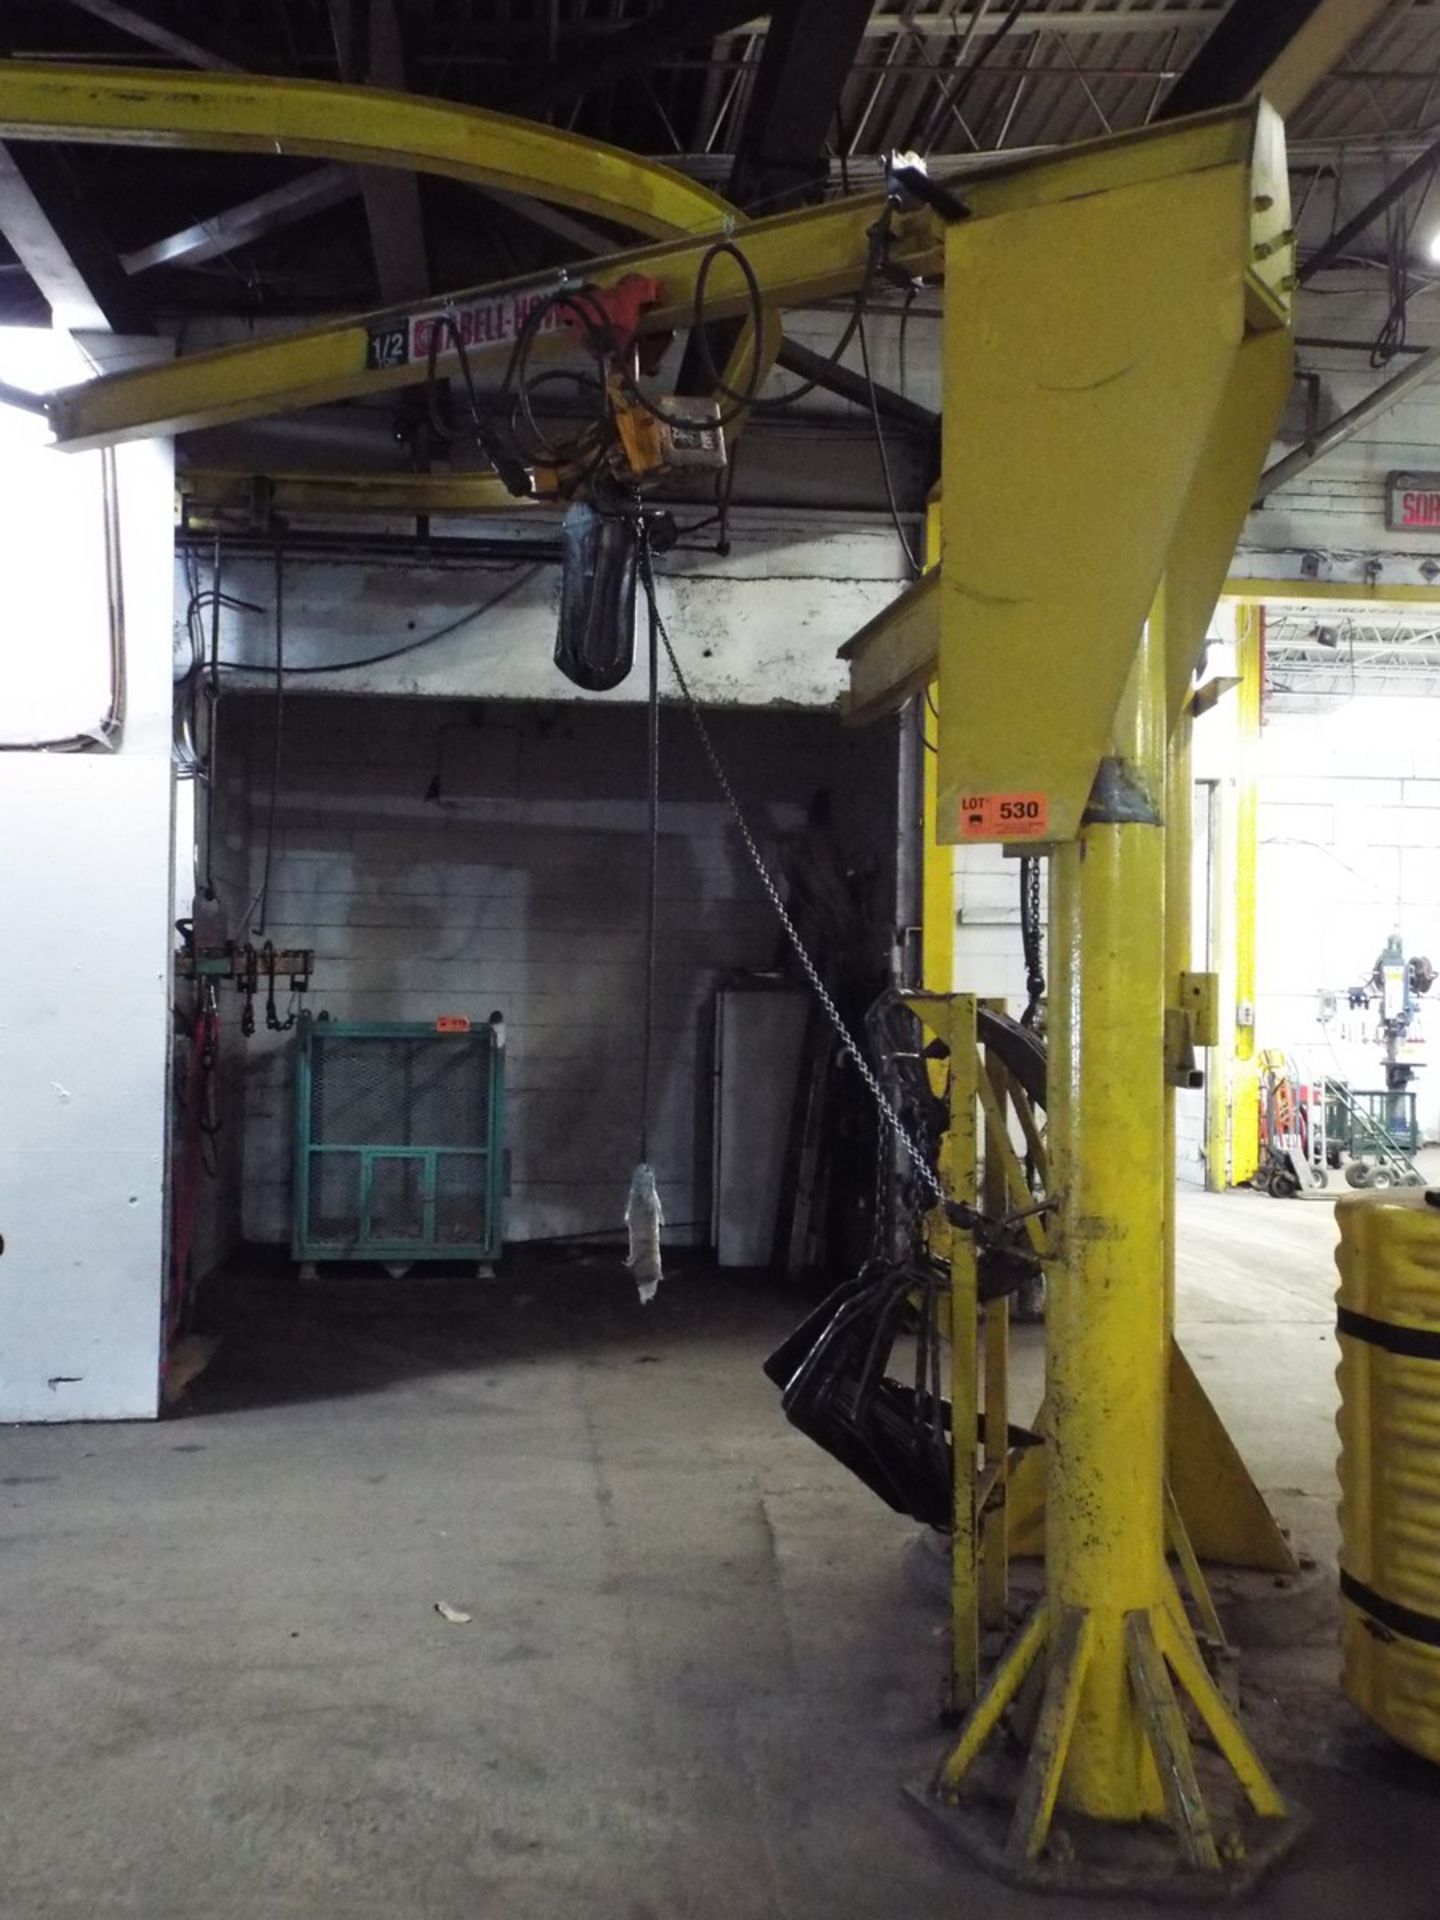 LOT/ ABELL-HOWE 1/2 TON CAP. FREE STANDING JIB ARM WITH KITO 1/4 TON ELECTRIC HOIST (CI)